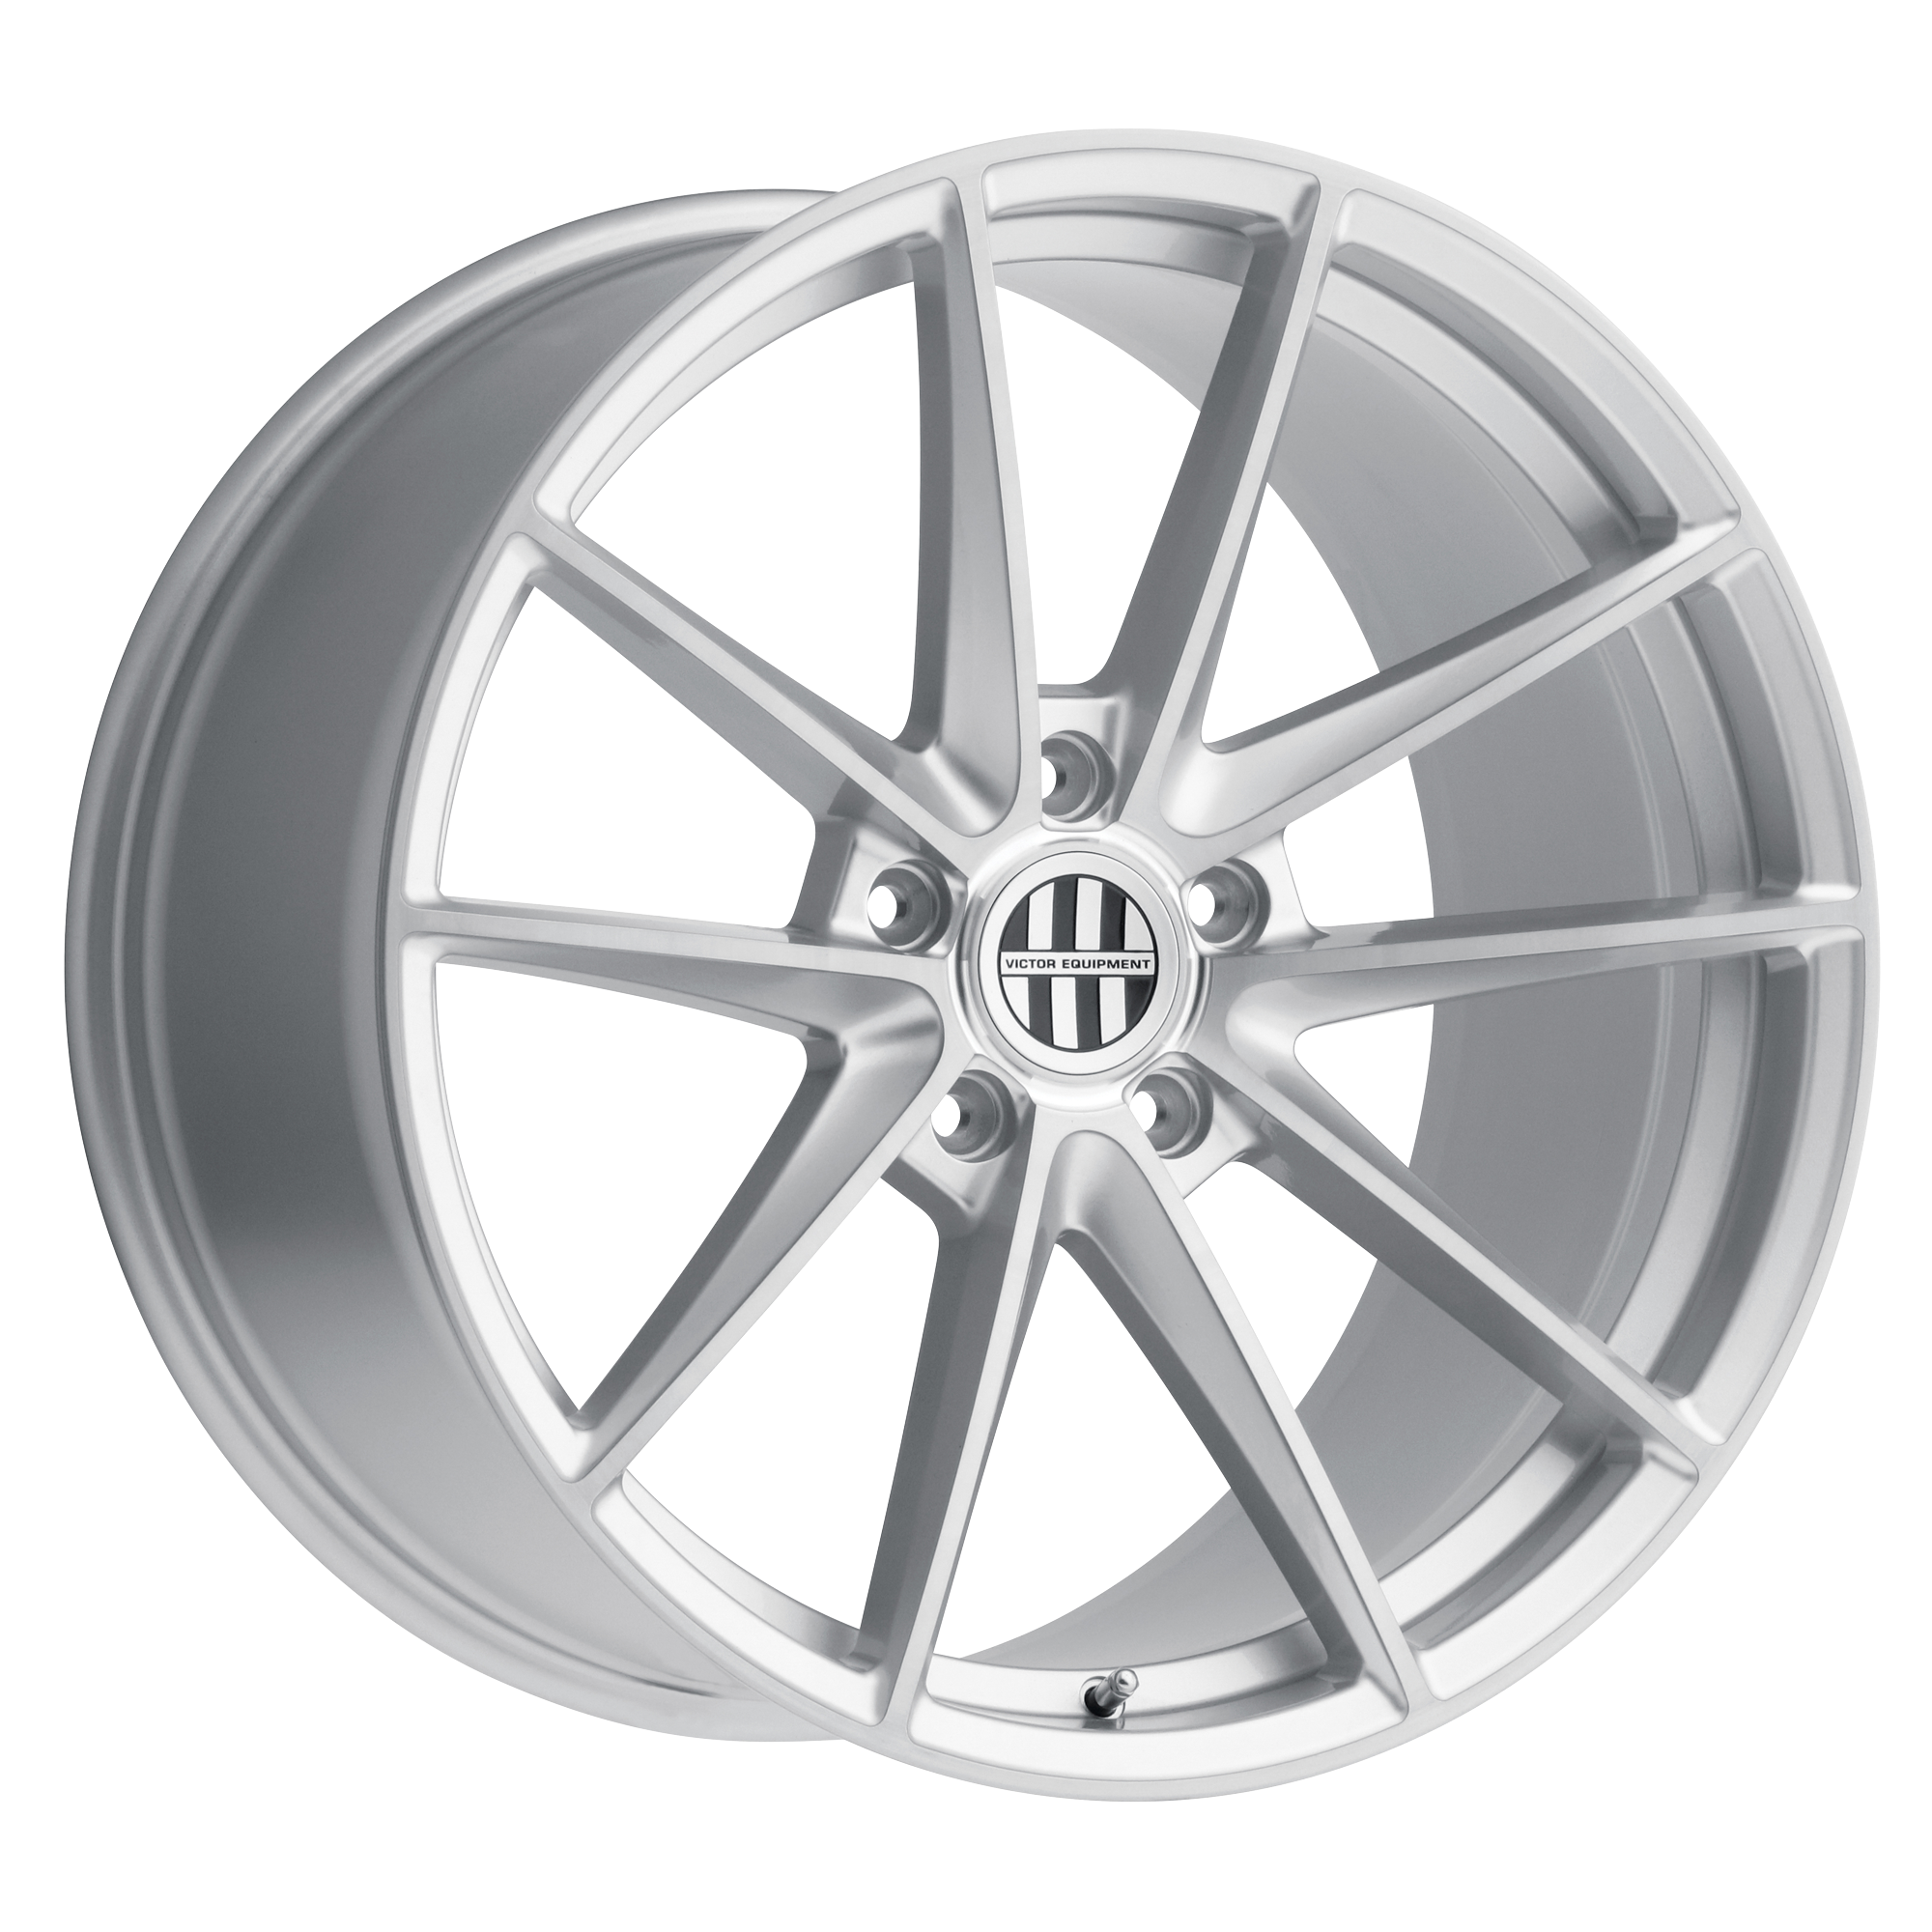 VICTOR EQUIPMENT ZUFFEN SILVER W/ BRUSHED FACE WHEELS | 20X10 | 5X130 | OFFSET: 50MM | CB: 71.5MM